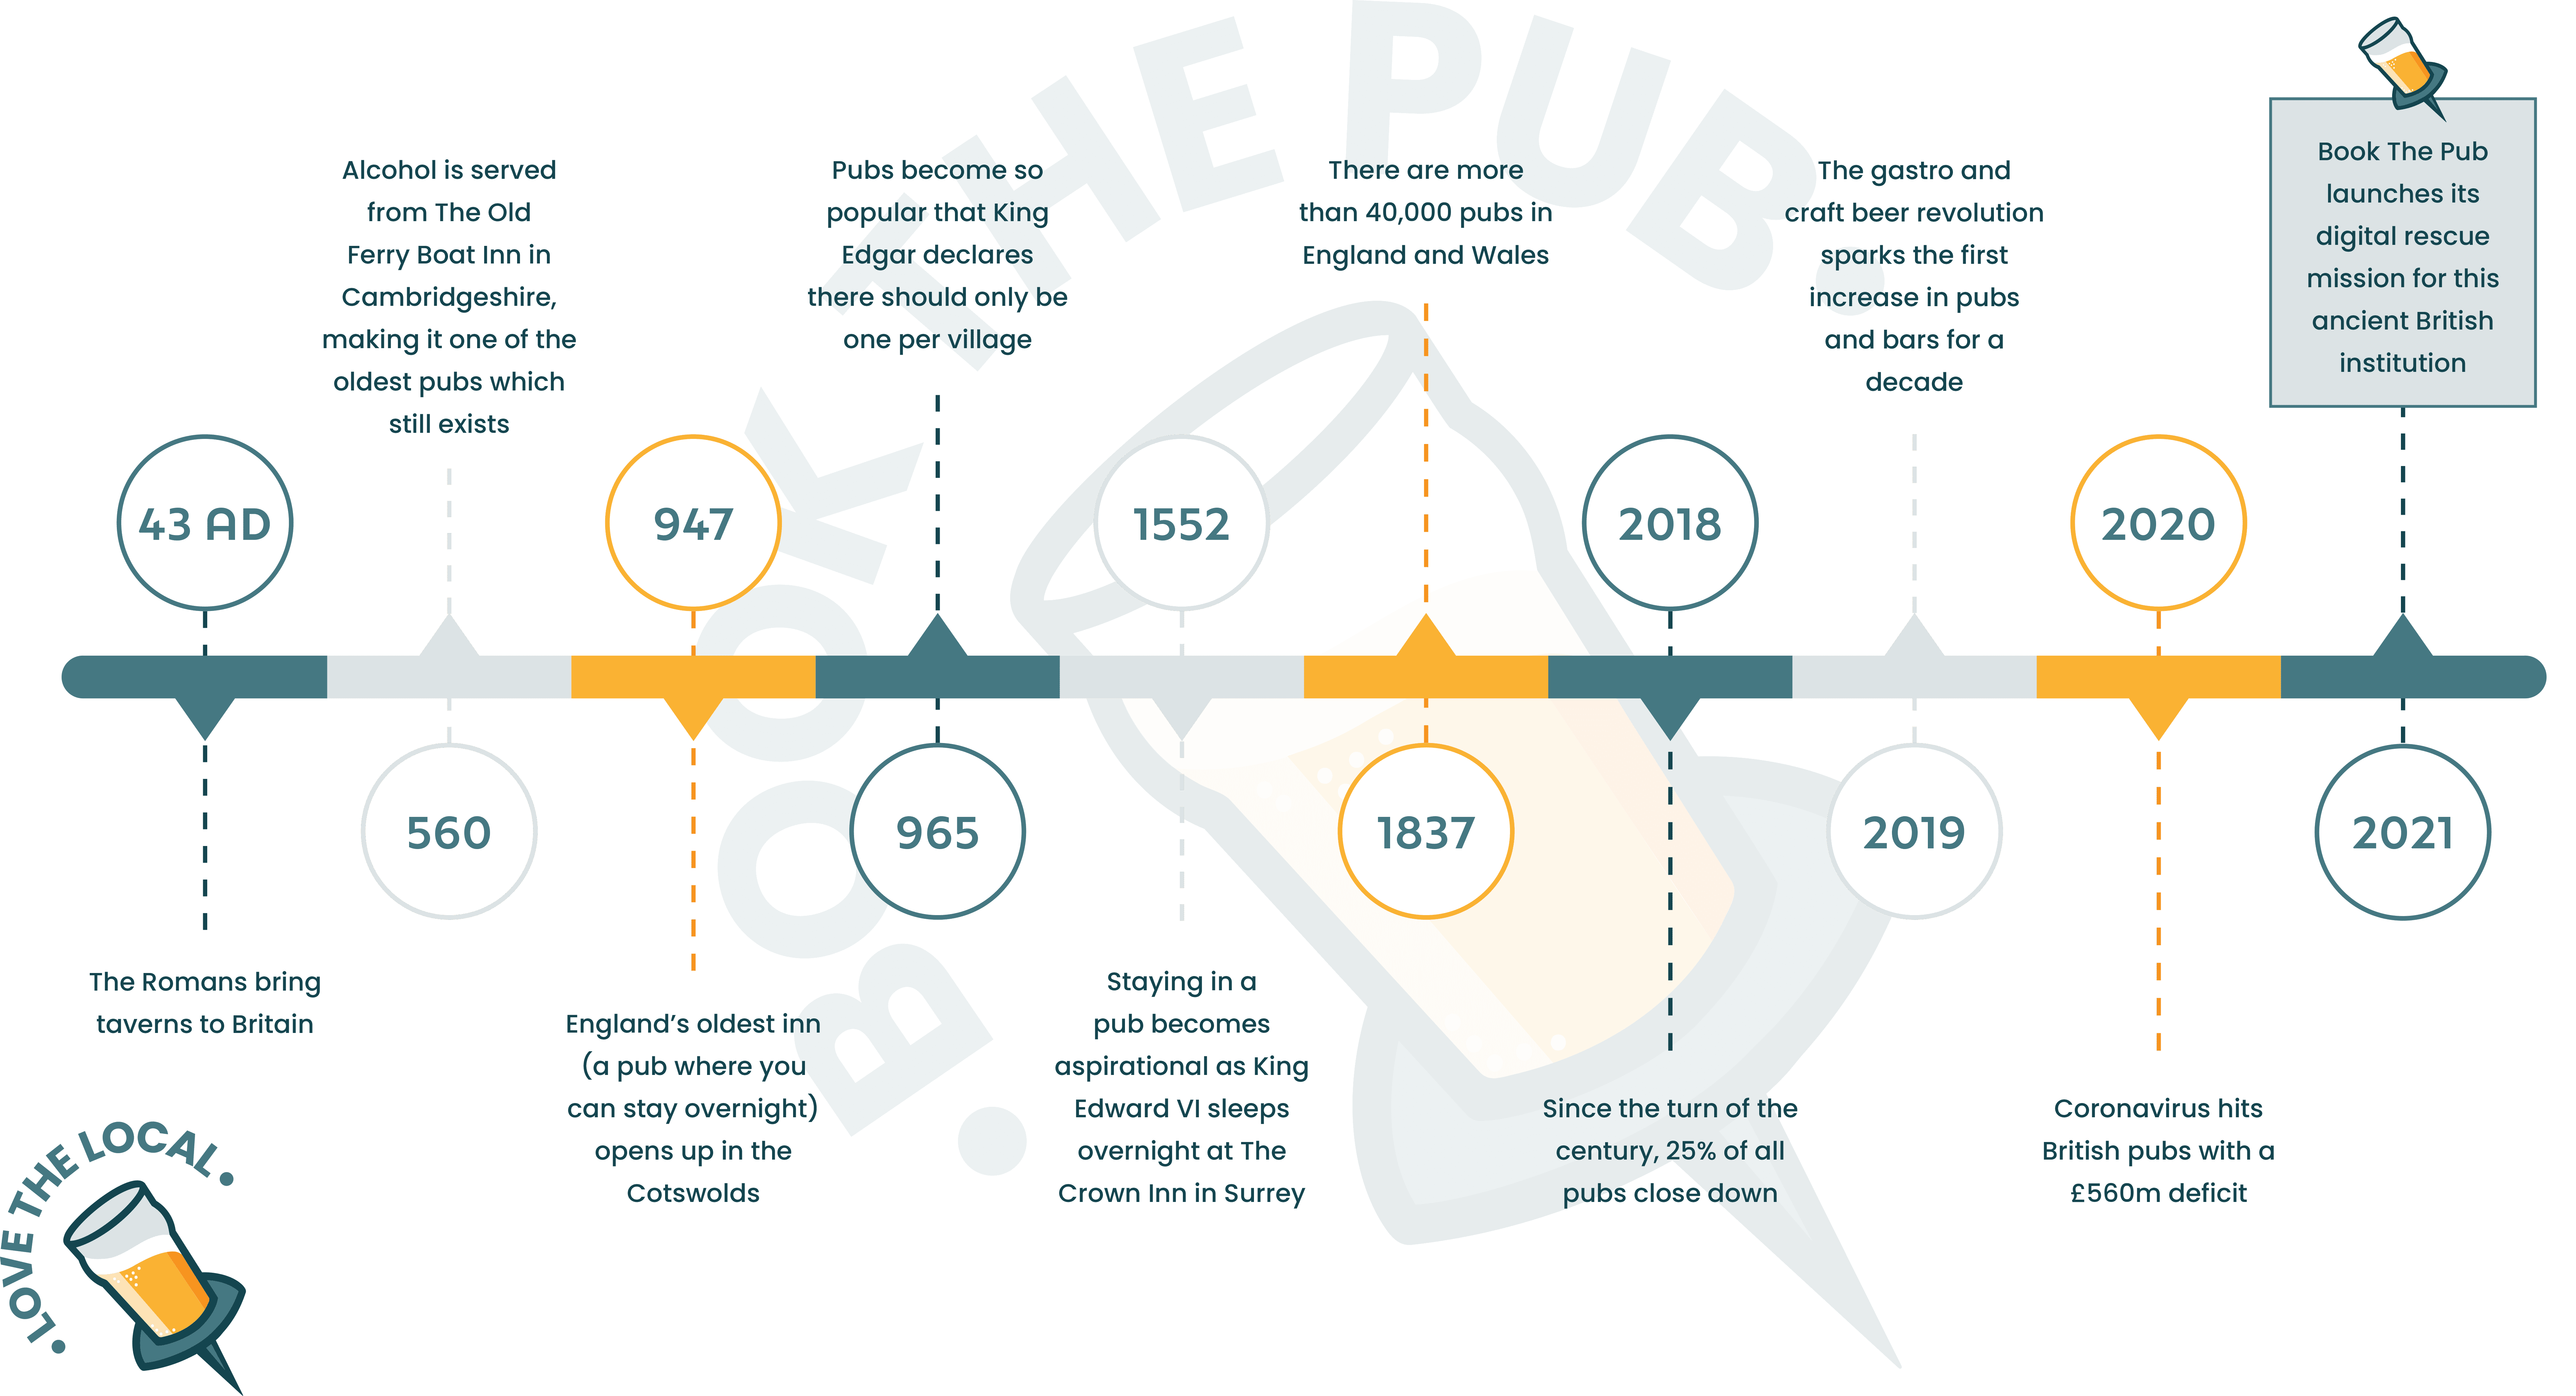 Book The Pub Timeline